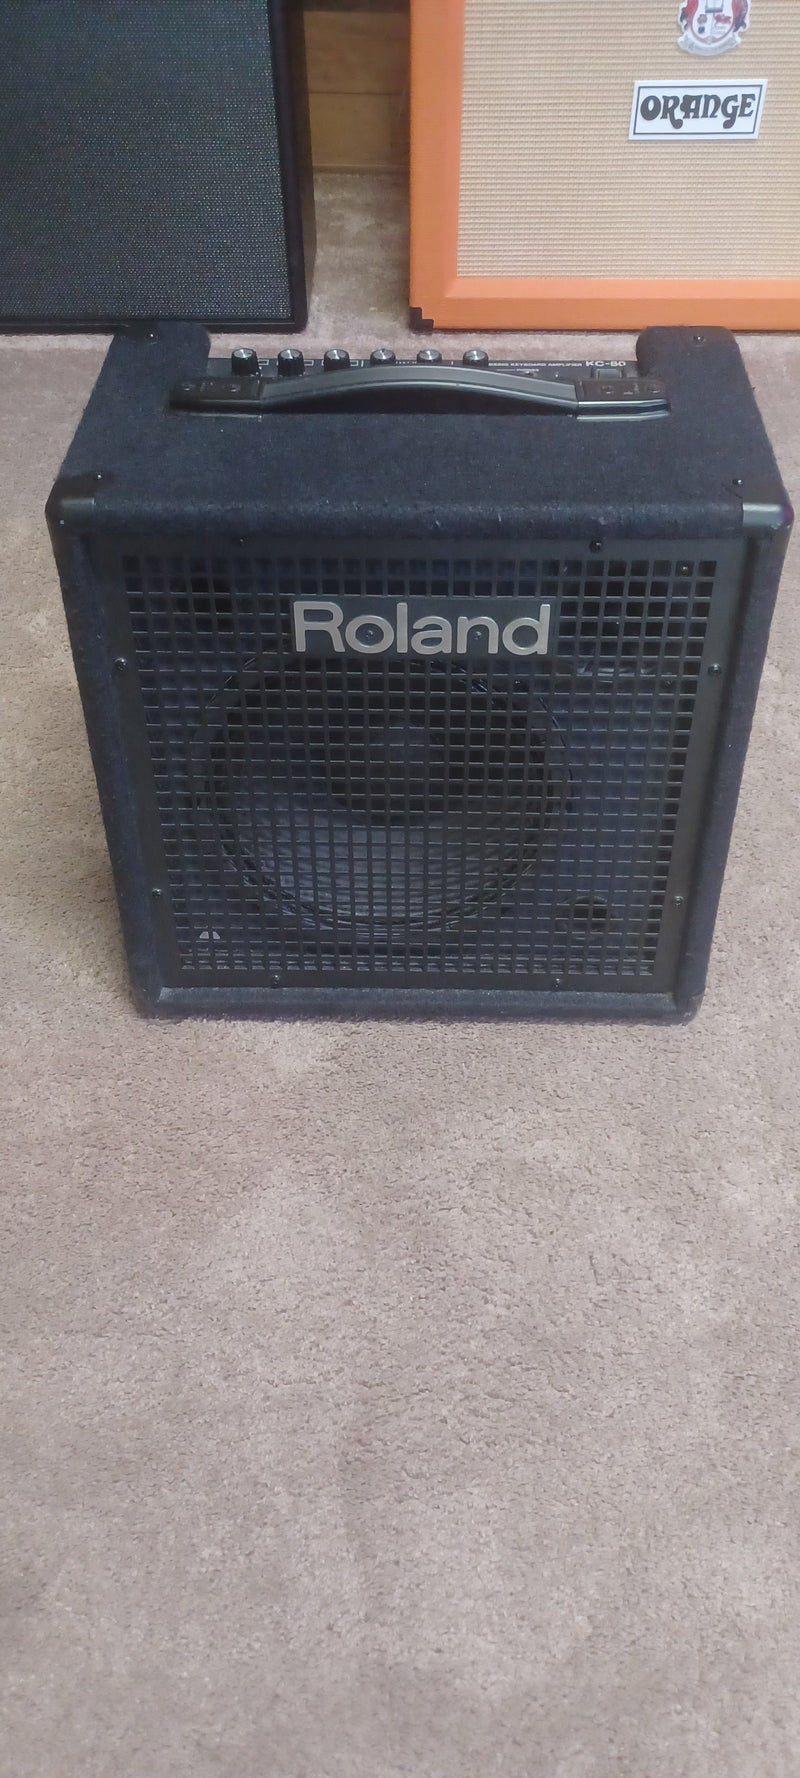 Roland KC-80 3-Ch Mixing Keyboard Amplifier (USED)